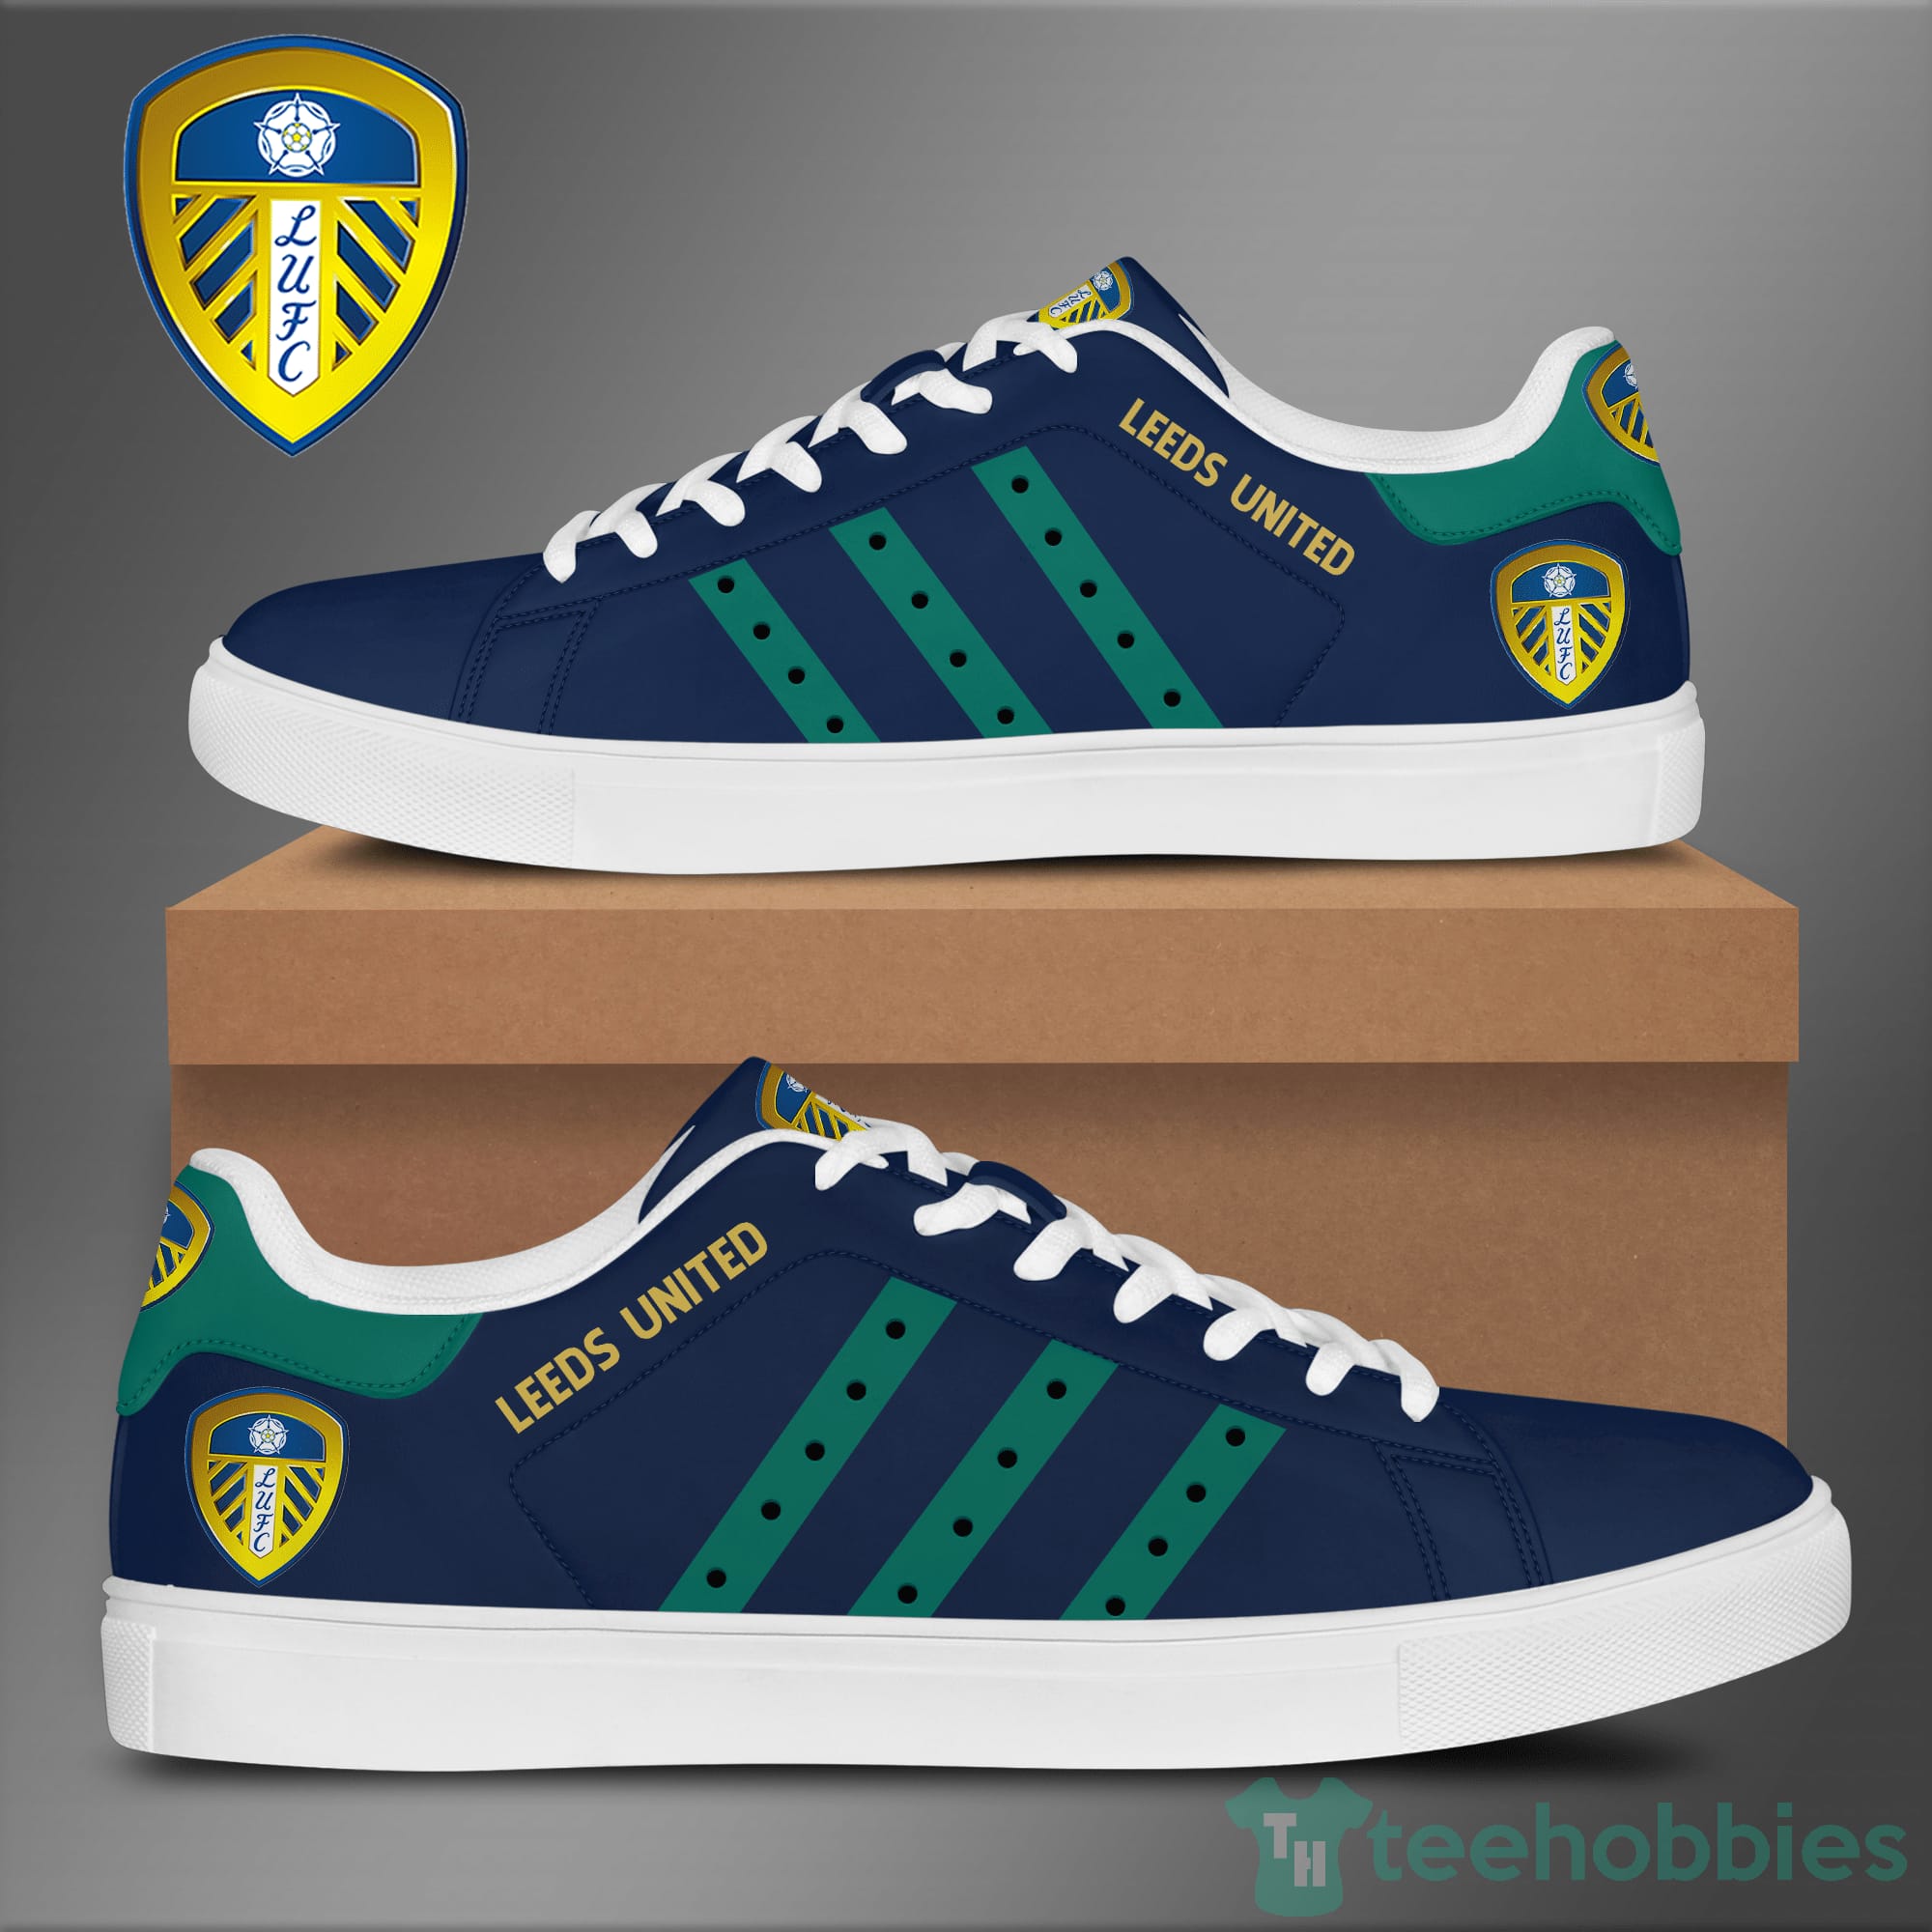 Leeds United F.C Low Top Skate Shoes Product photo 1